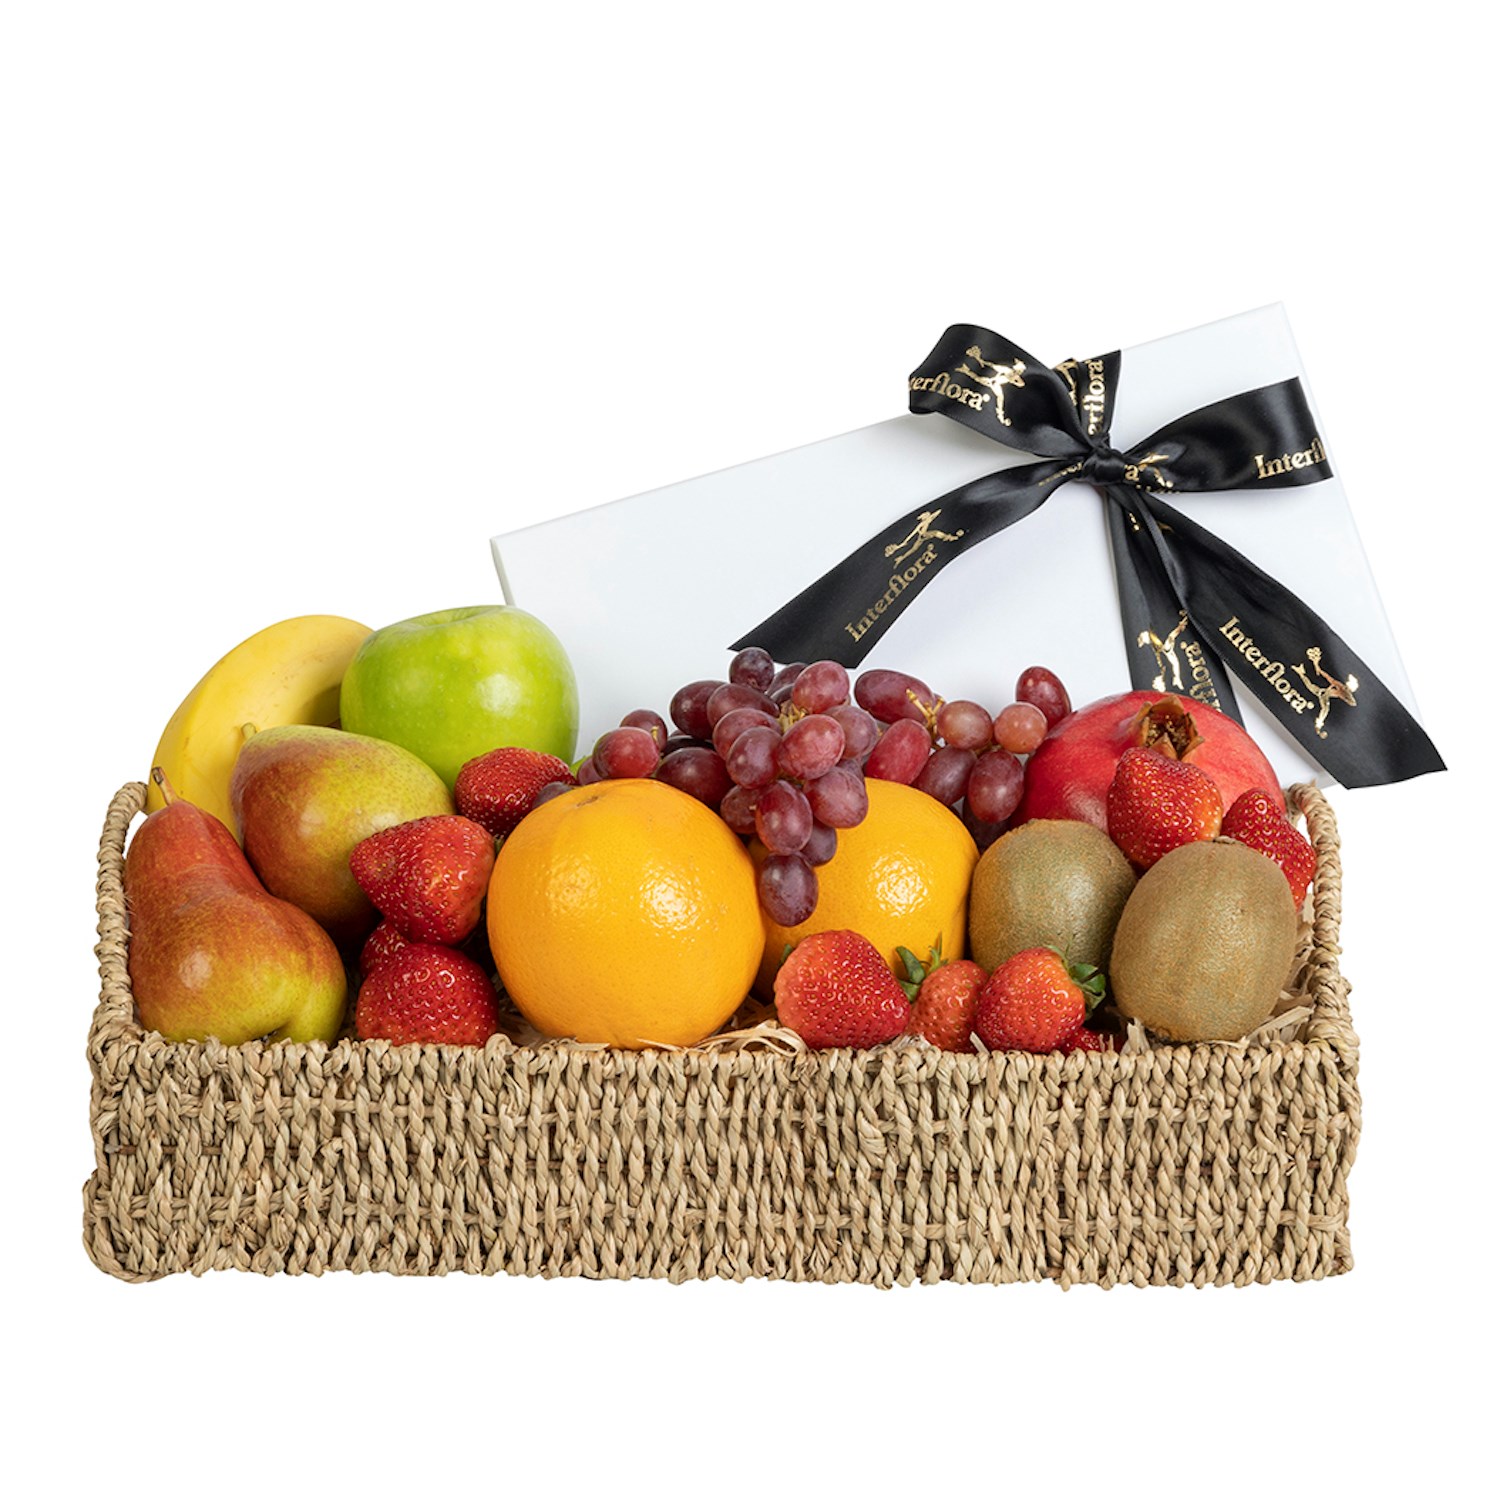 product image for Fruit and Chocolate Gift Basket